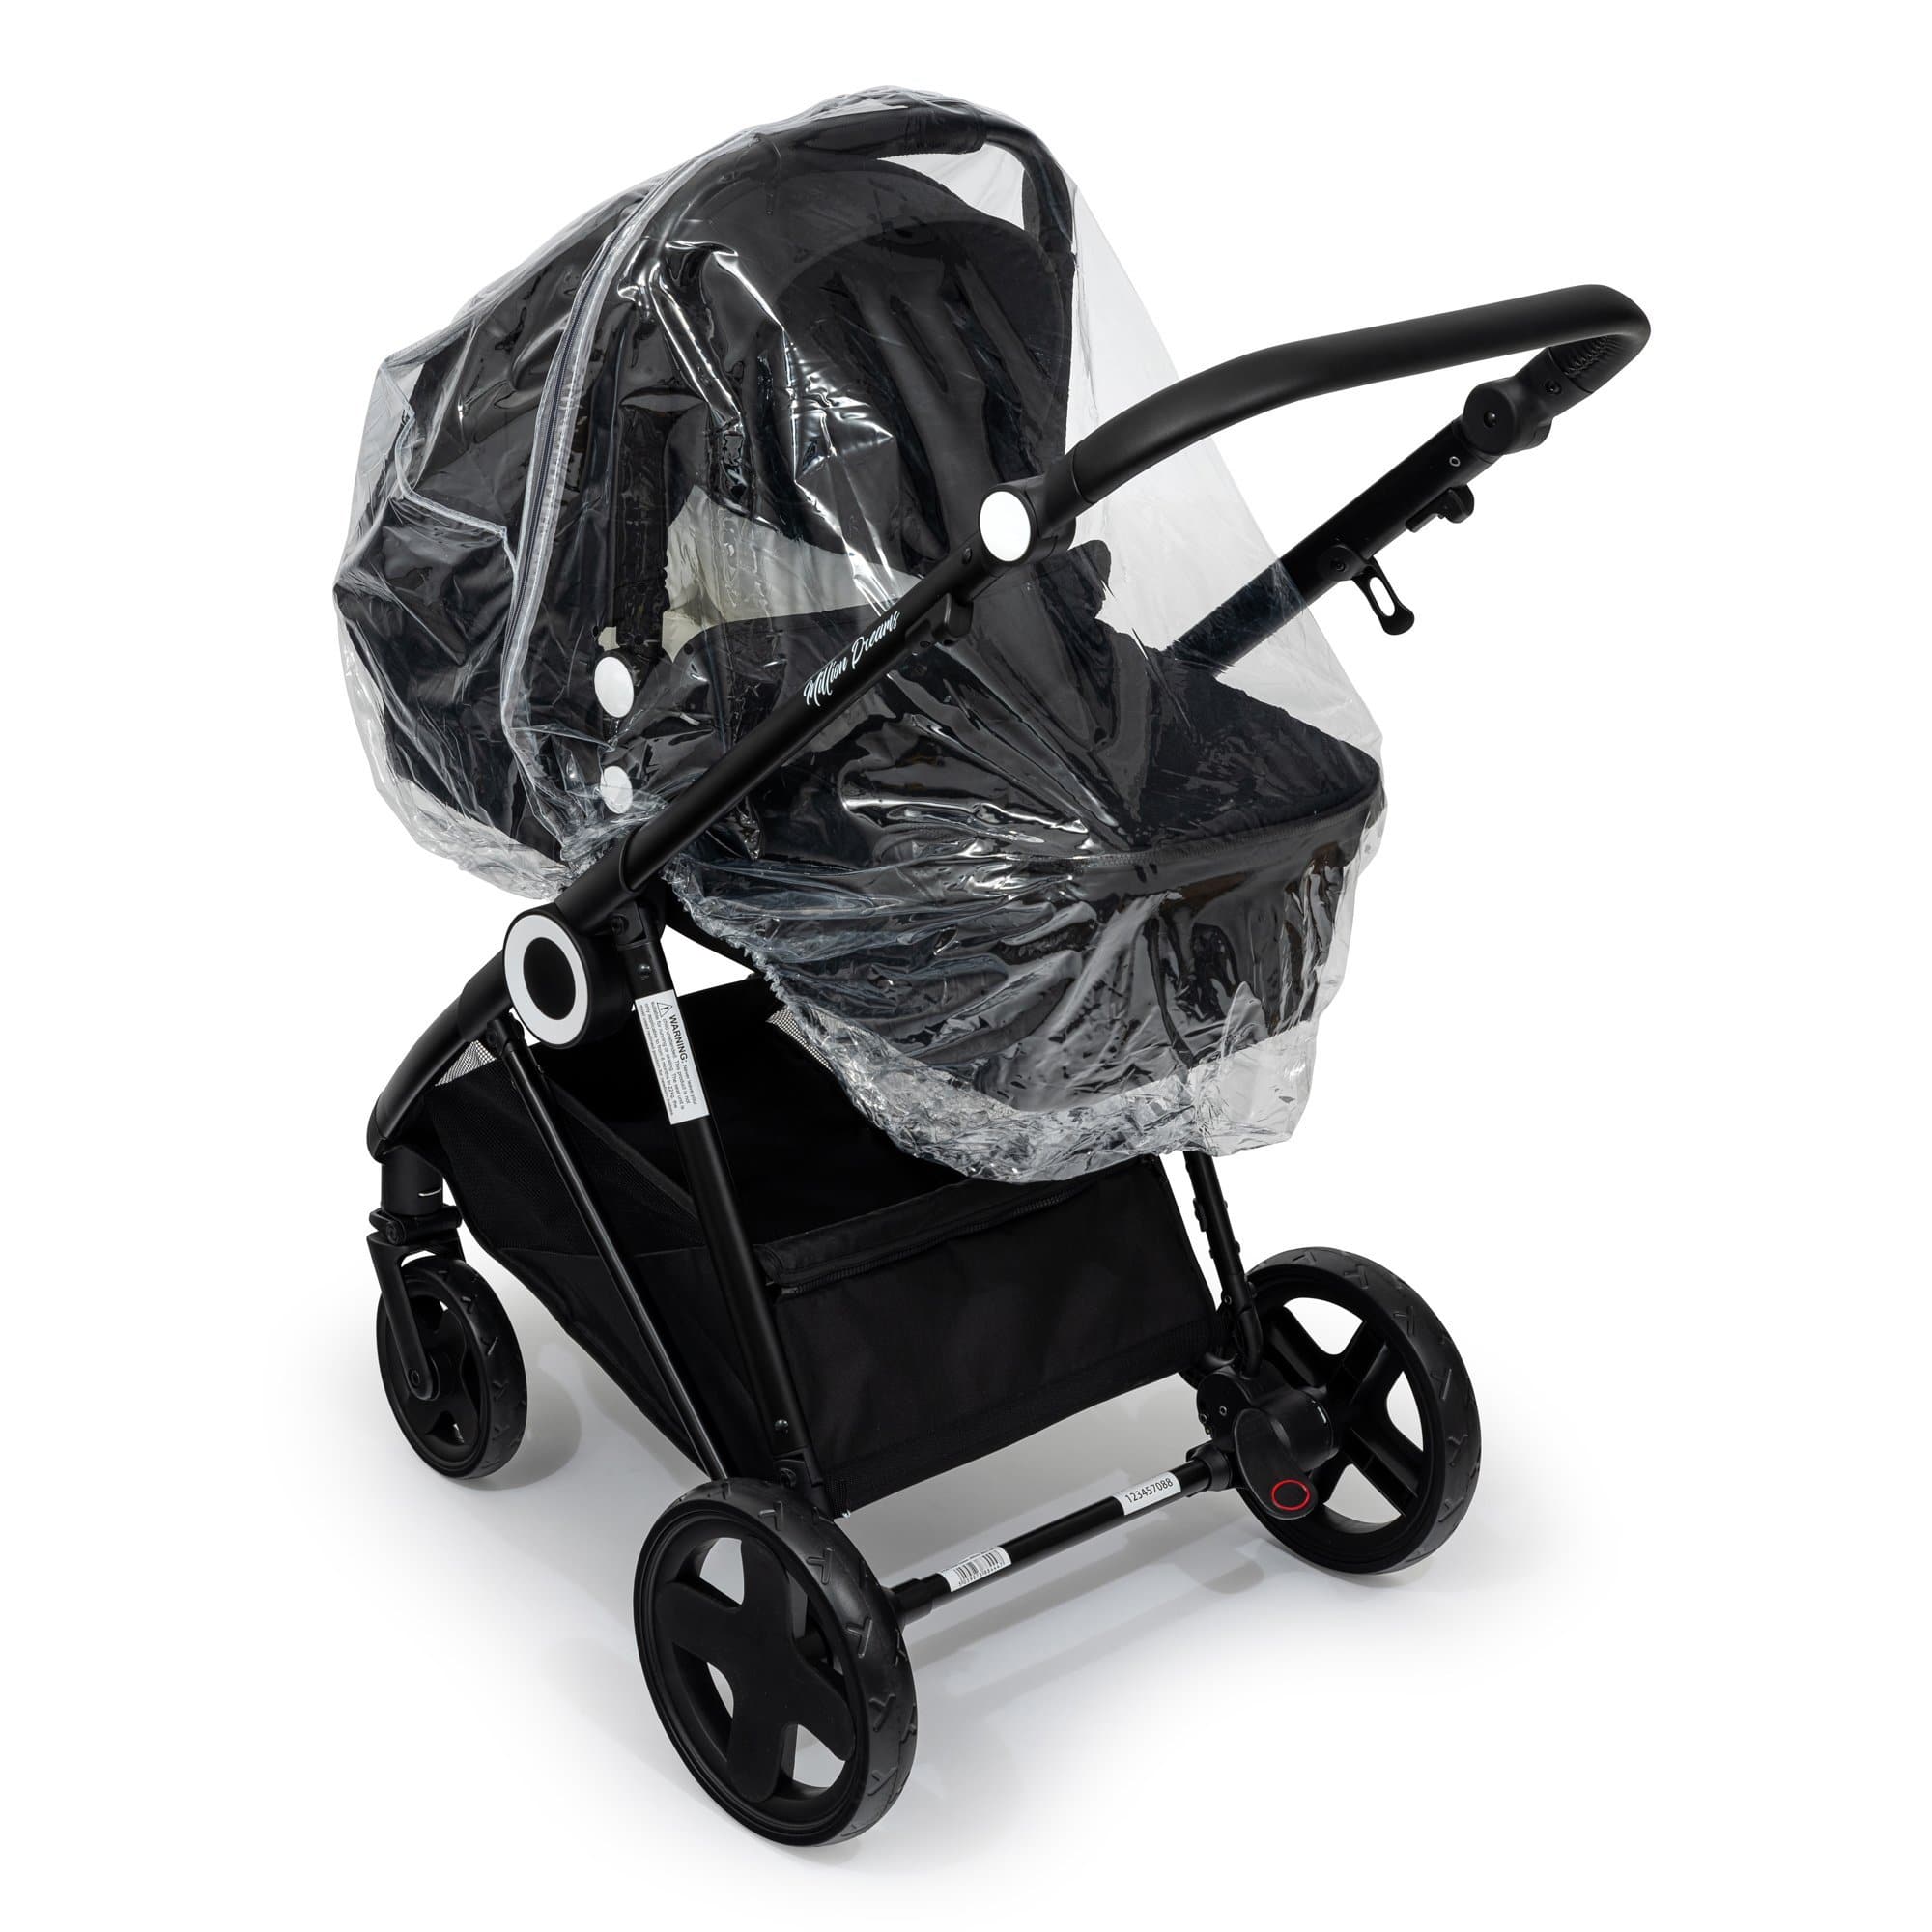 2 in 1 Rain Cover Compatible with Esprit - Fits All Models - For Your Little One